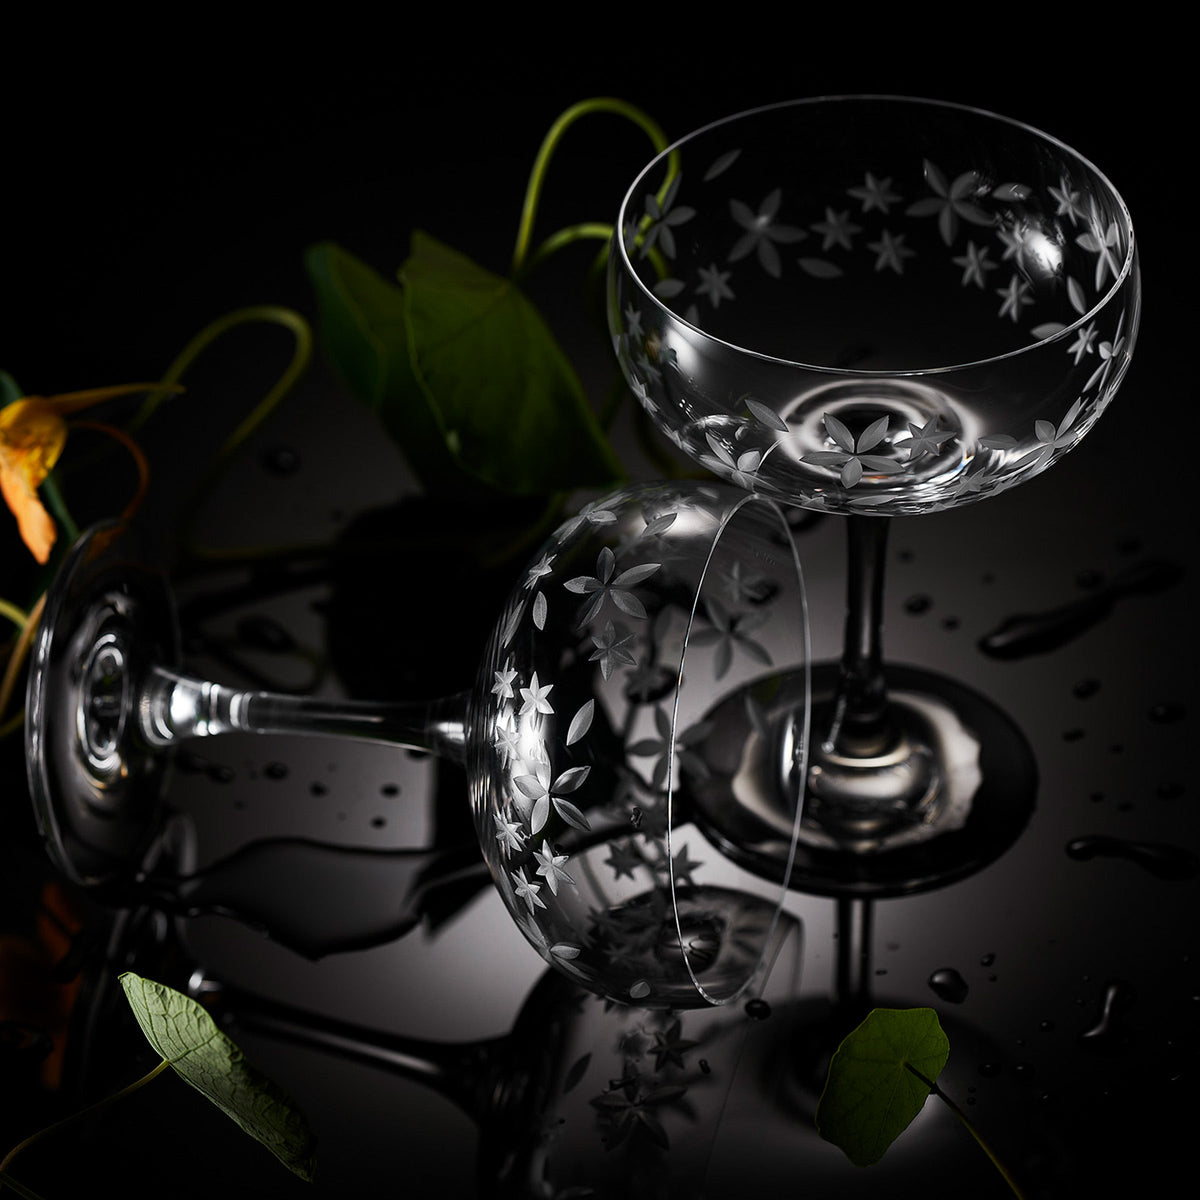 Two Chatham Bloom Coupe Cocktail Glasses, from the Caskata brand, elegantly displayed on a sleek black surface. These exquisite glasses are meticulously crafted from lead-free crystal.